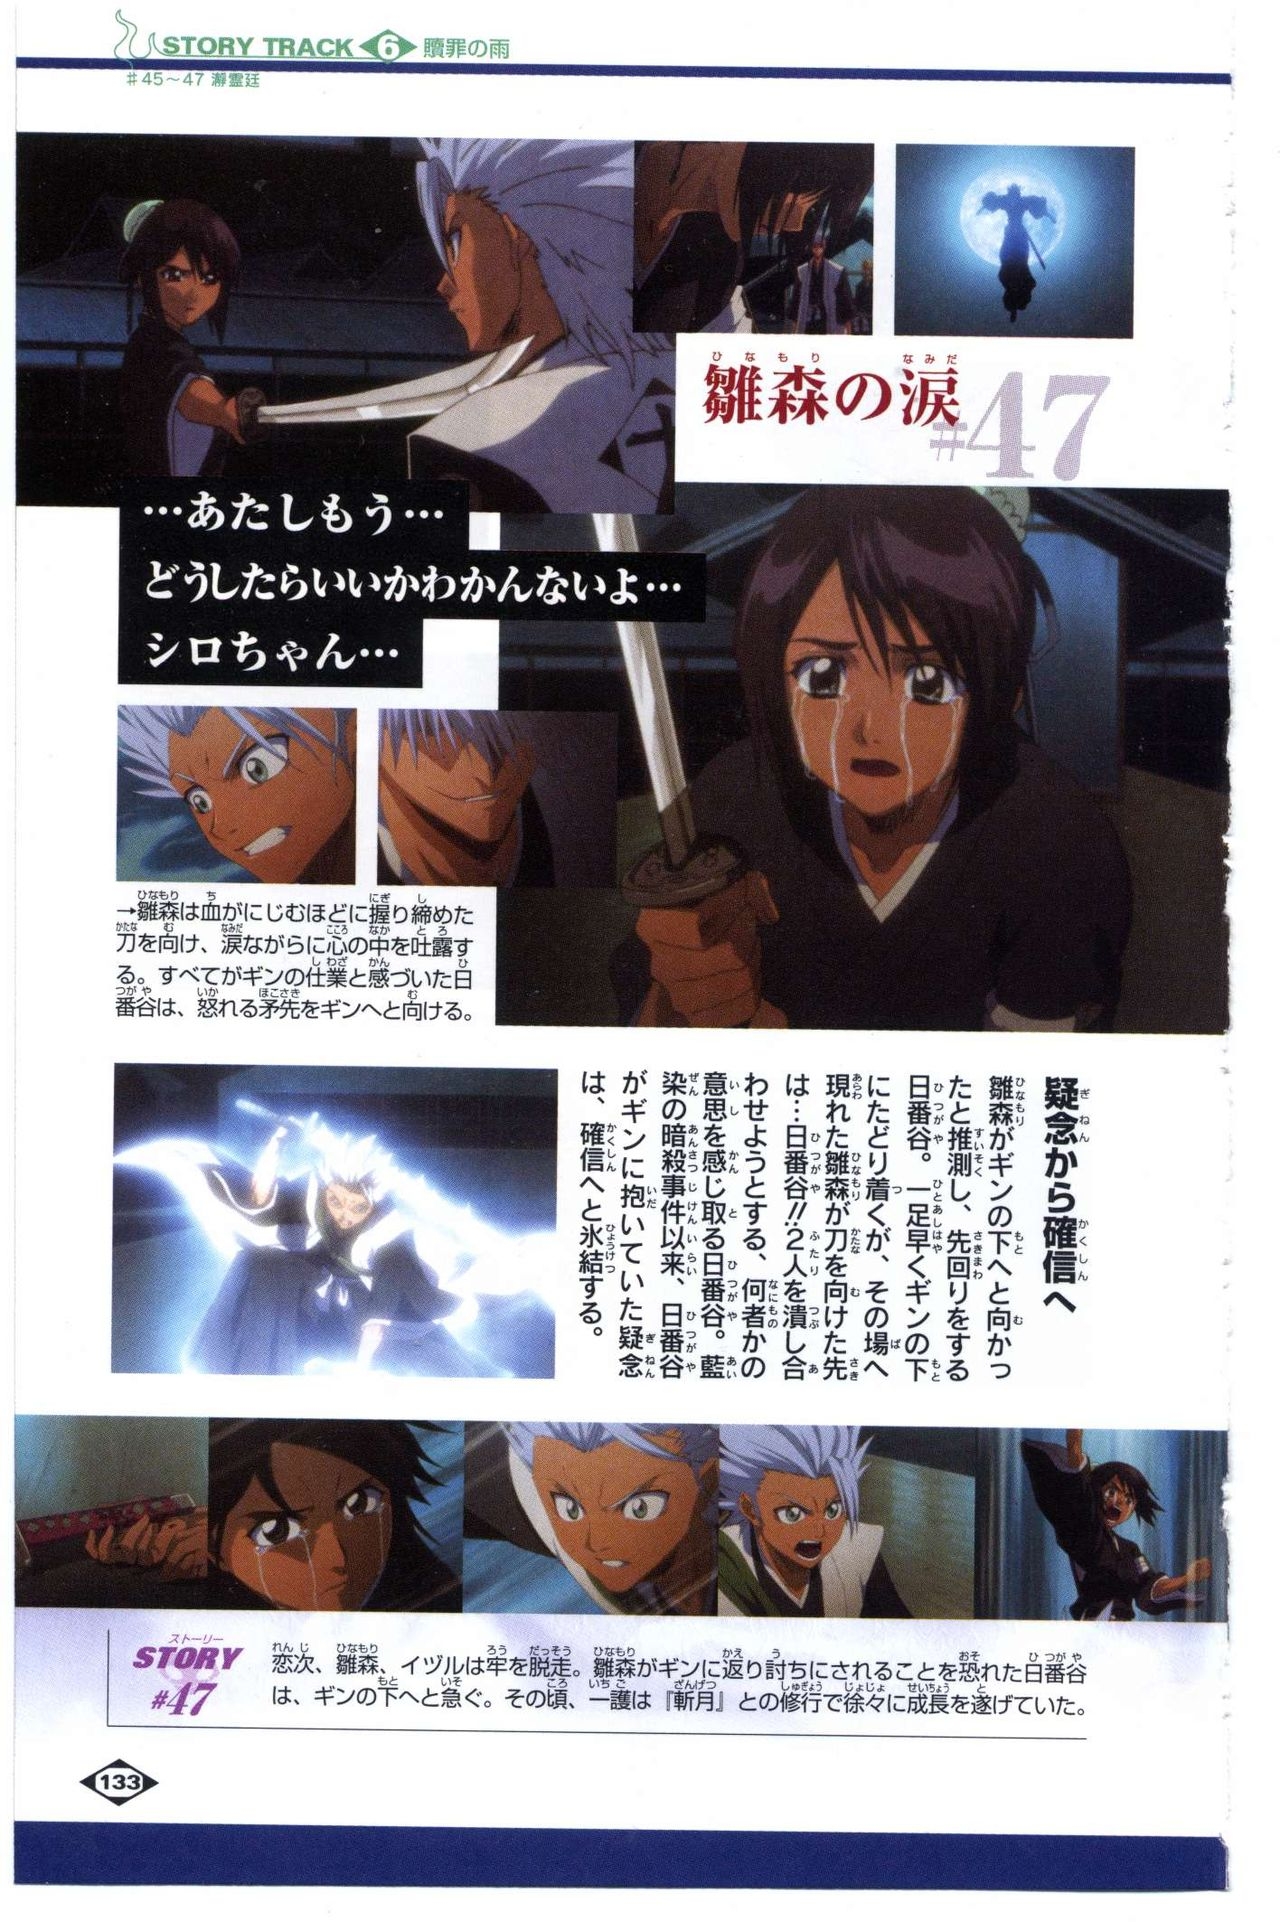 Bleach: Official Animation Book VIBEs 133